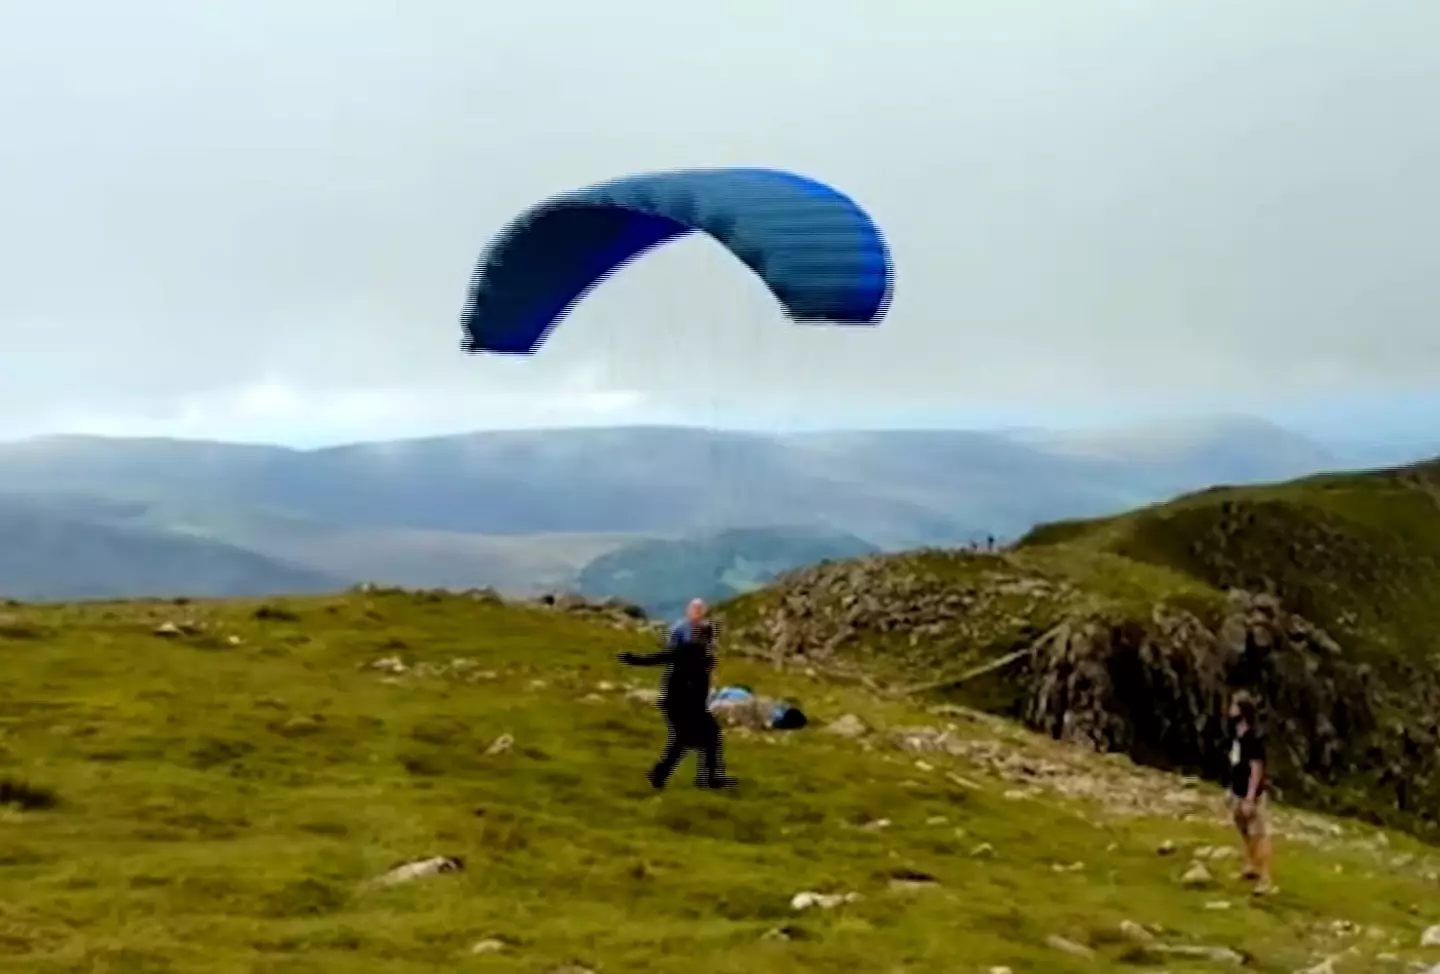 Tom Cruise paraglided off a hill for one of his latest Mission Impossible stunts.